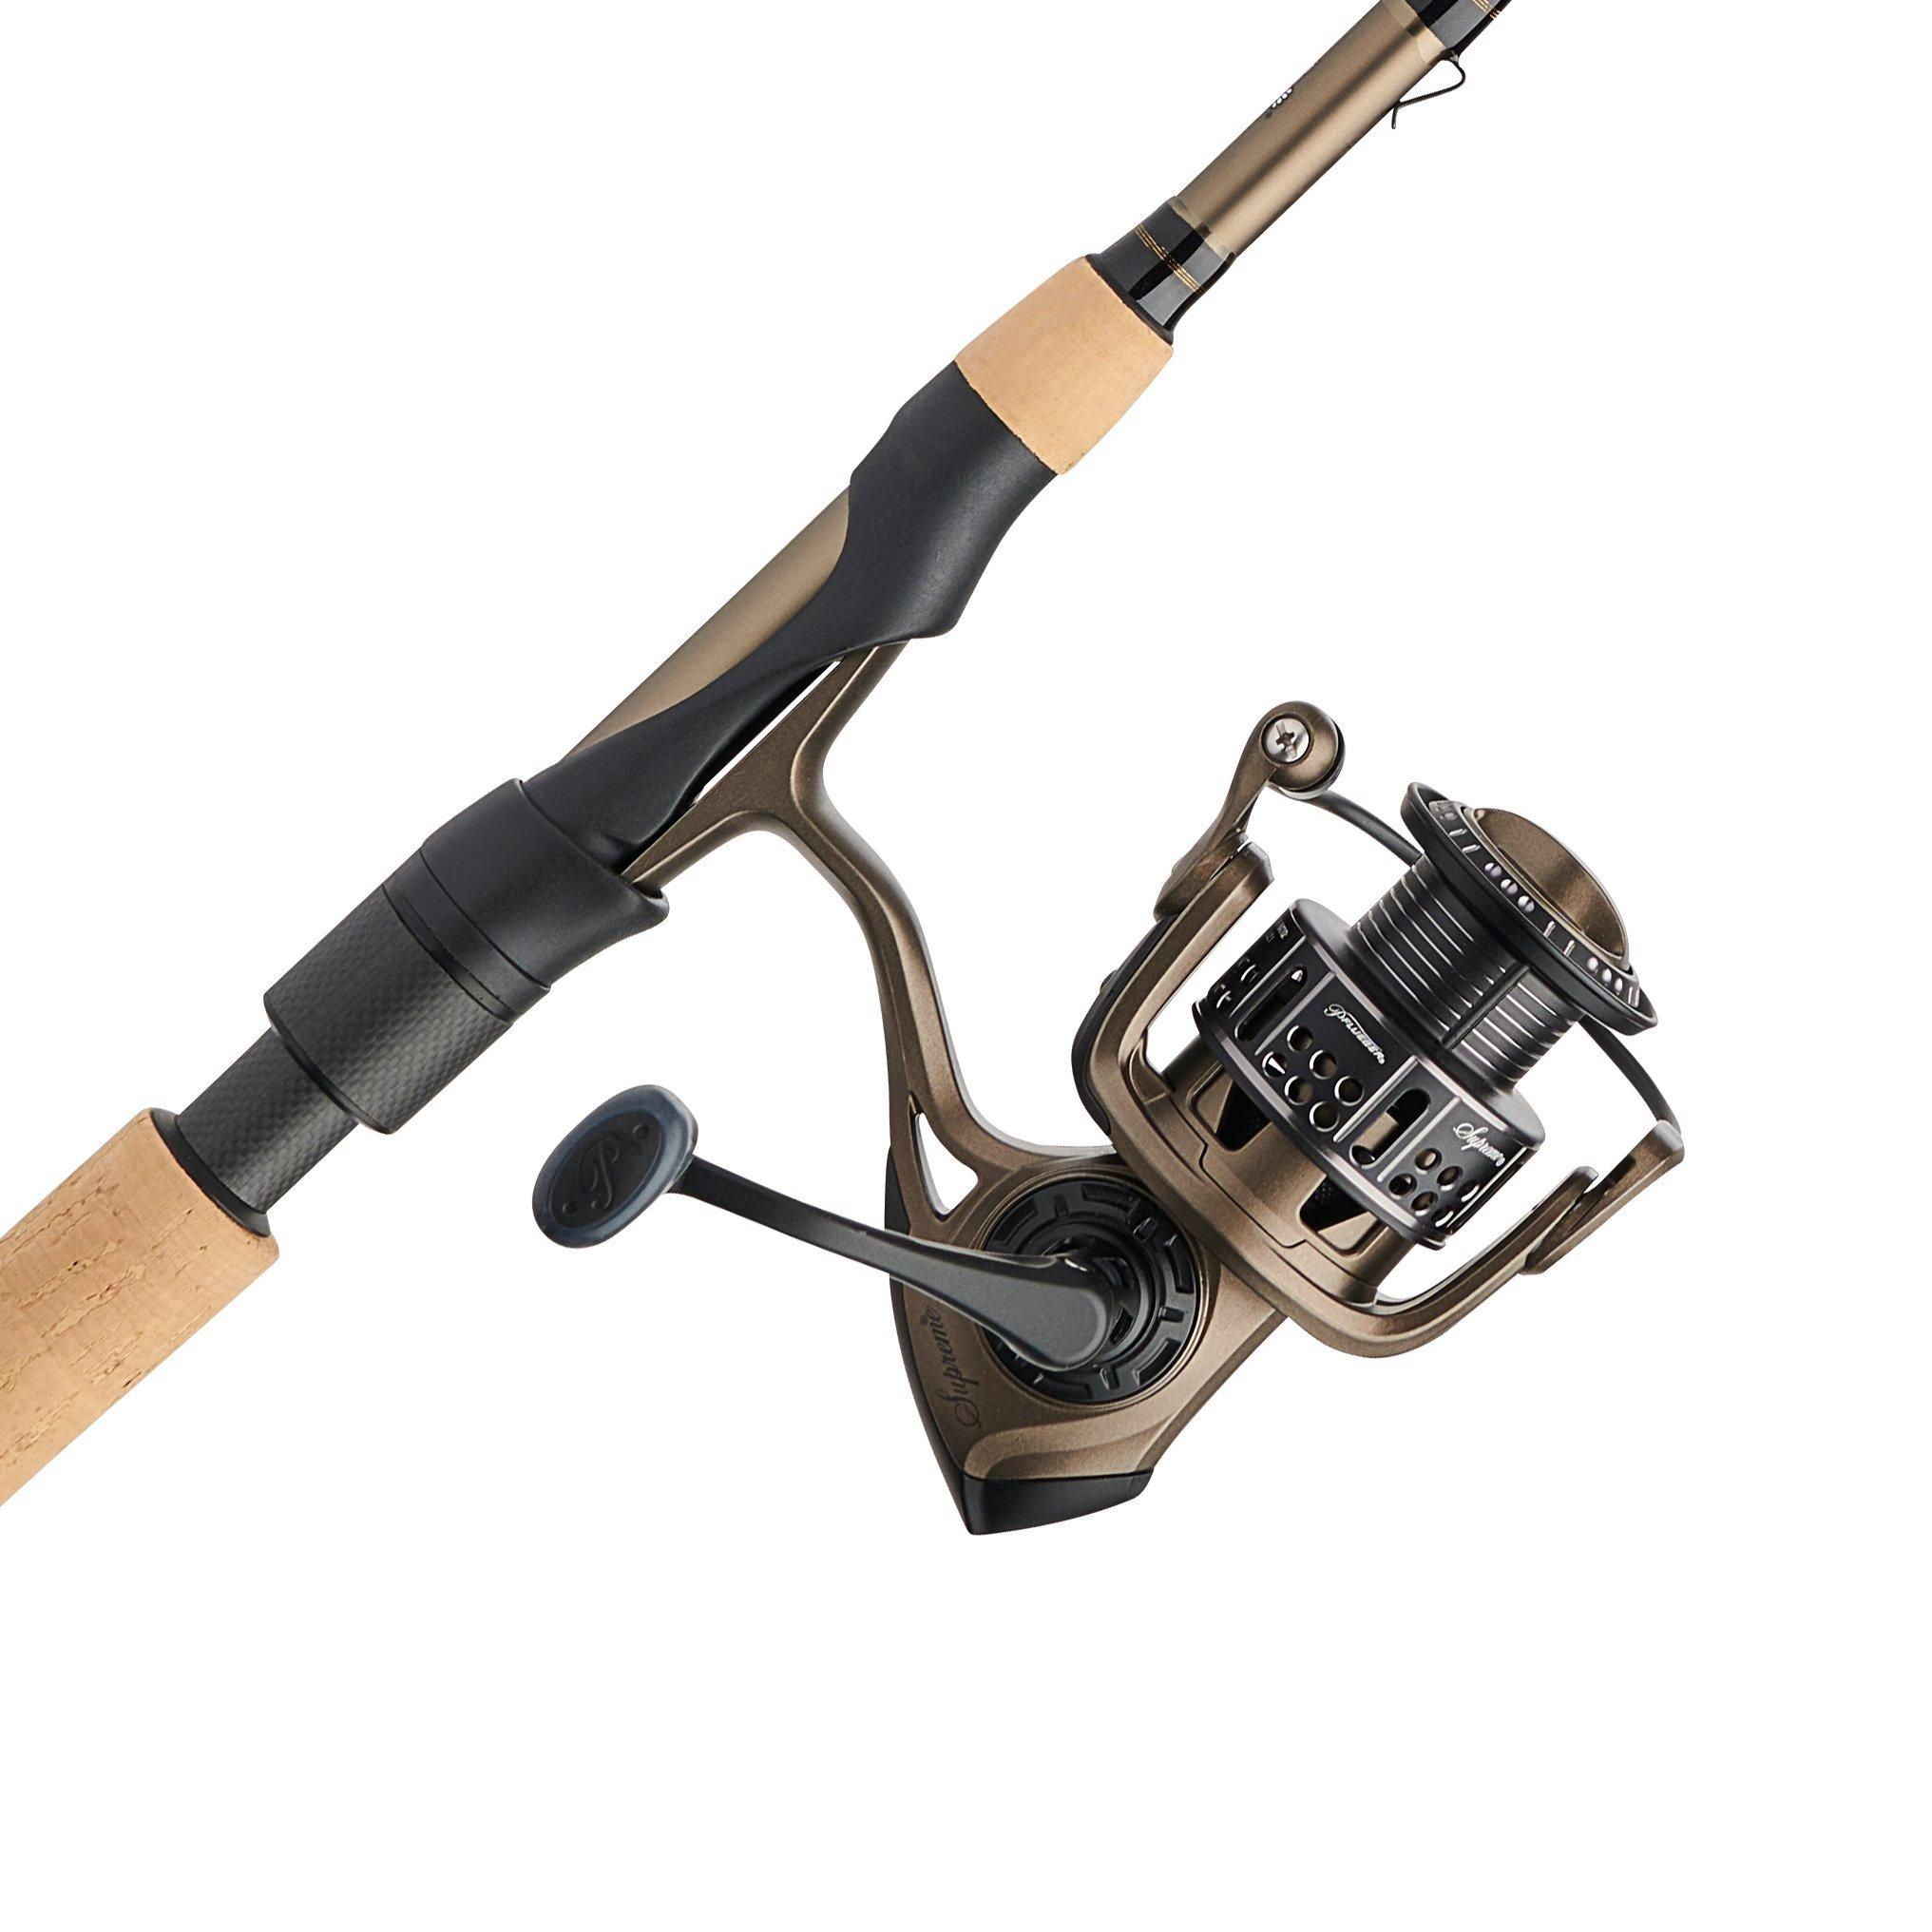 https://op2.0ps.us/original/opplanet-pflueger-supreme-spinning-combo-5-2-1-right-left-30-7ft-rod-length-medium-power-fast-action-1-piece-rod-sup30hmgpx70mcbo-main